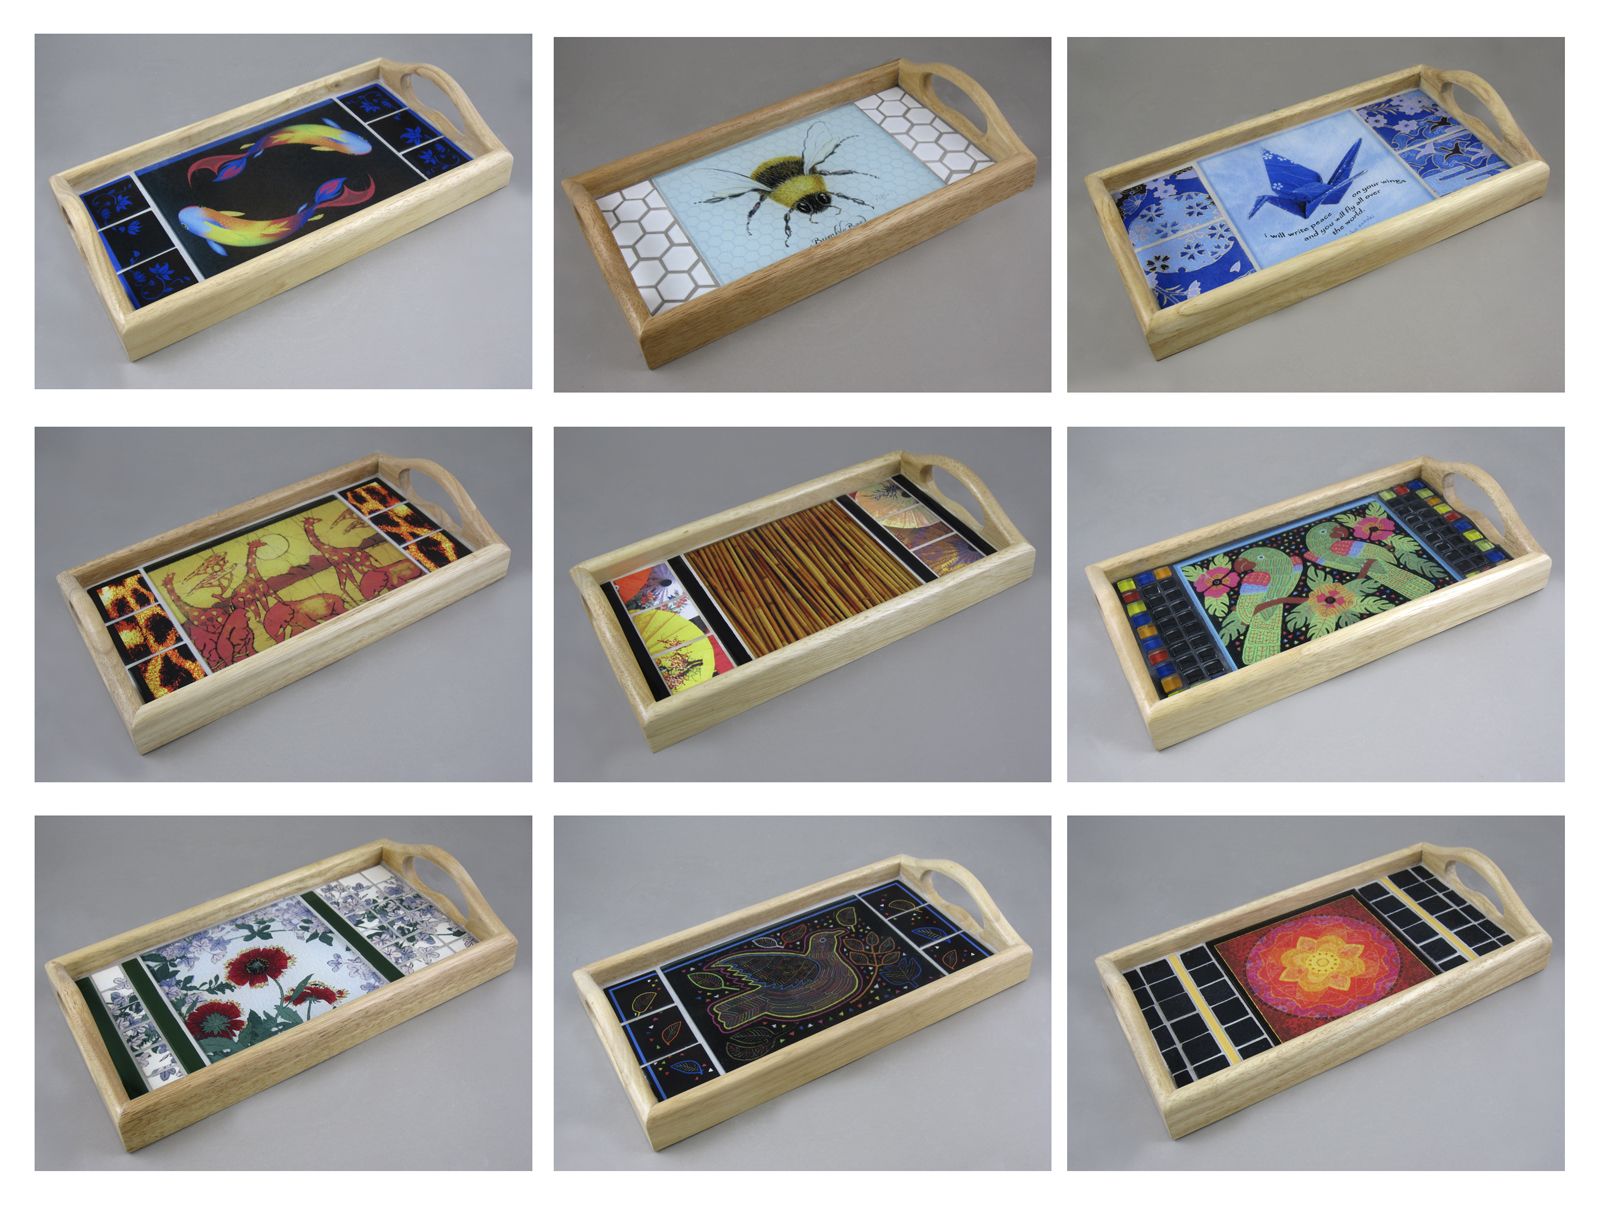 Serving Trays made with sublimation printing